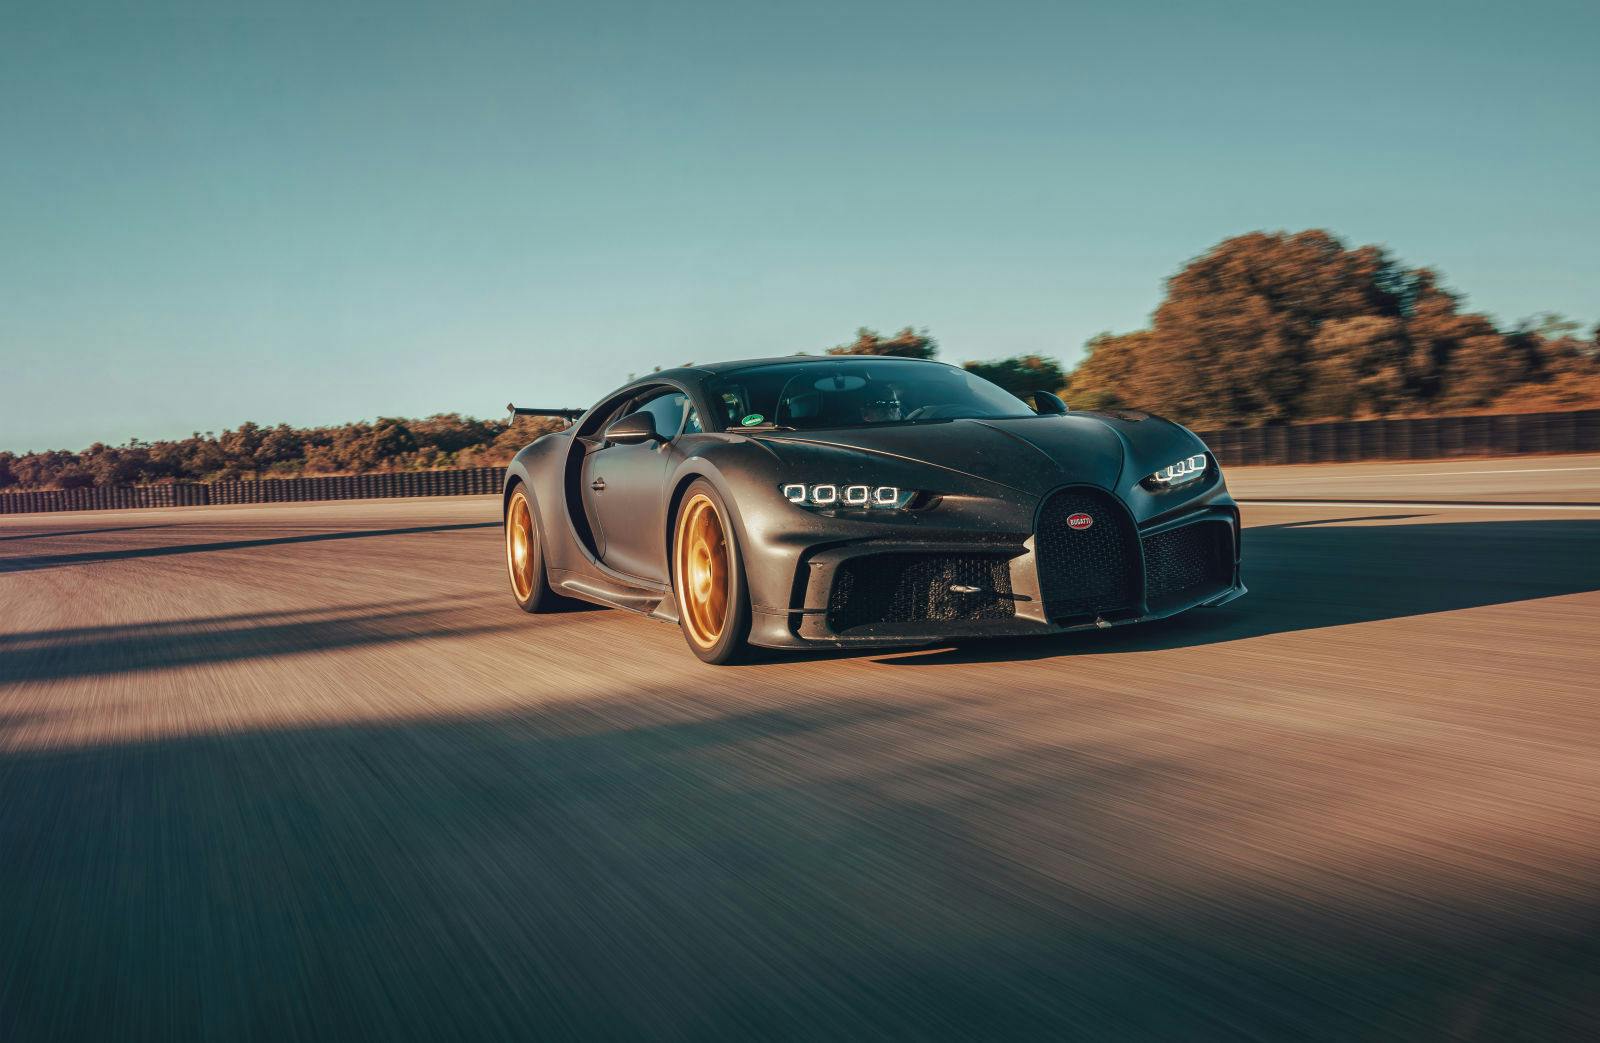 Bugatti Official Pilot Andy Wallace tests a pre-series prototype of the Chiron Pur Sport at the Nardò proving ground in Apulia, Italy.